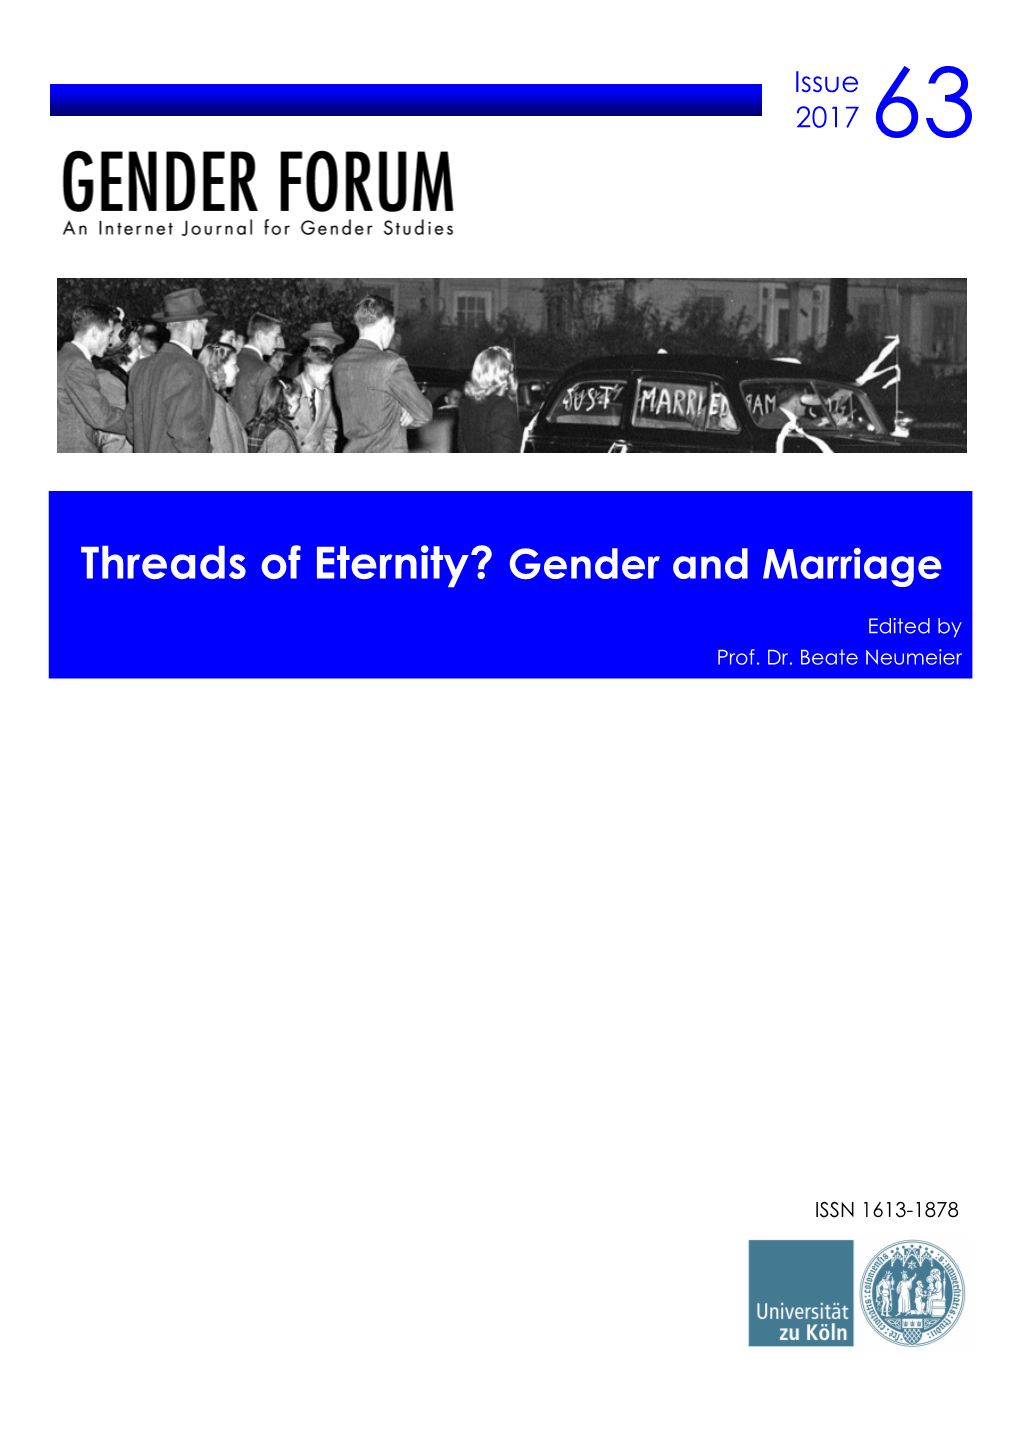 Threads of Eternity? Gender and Marriage22 Edited by Prof